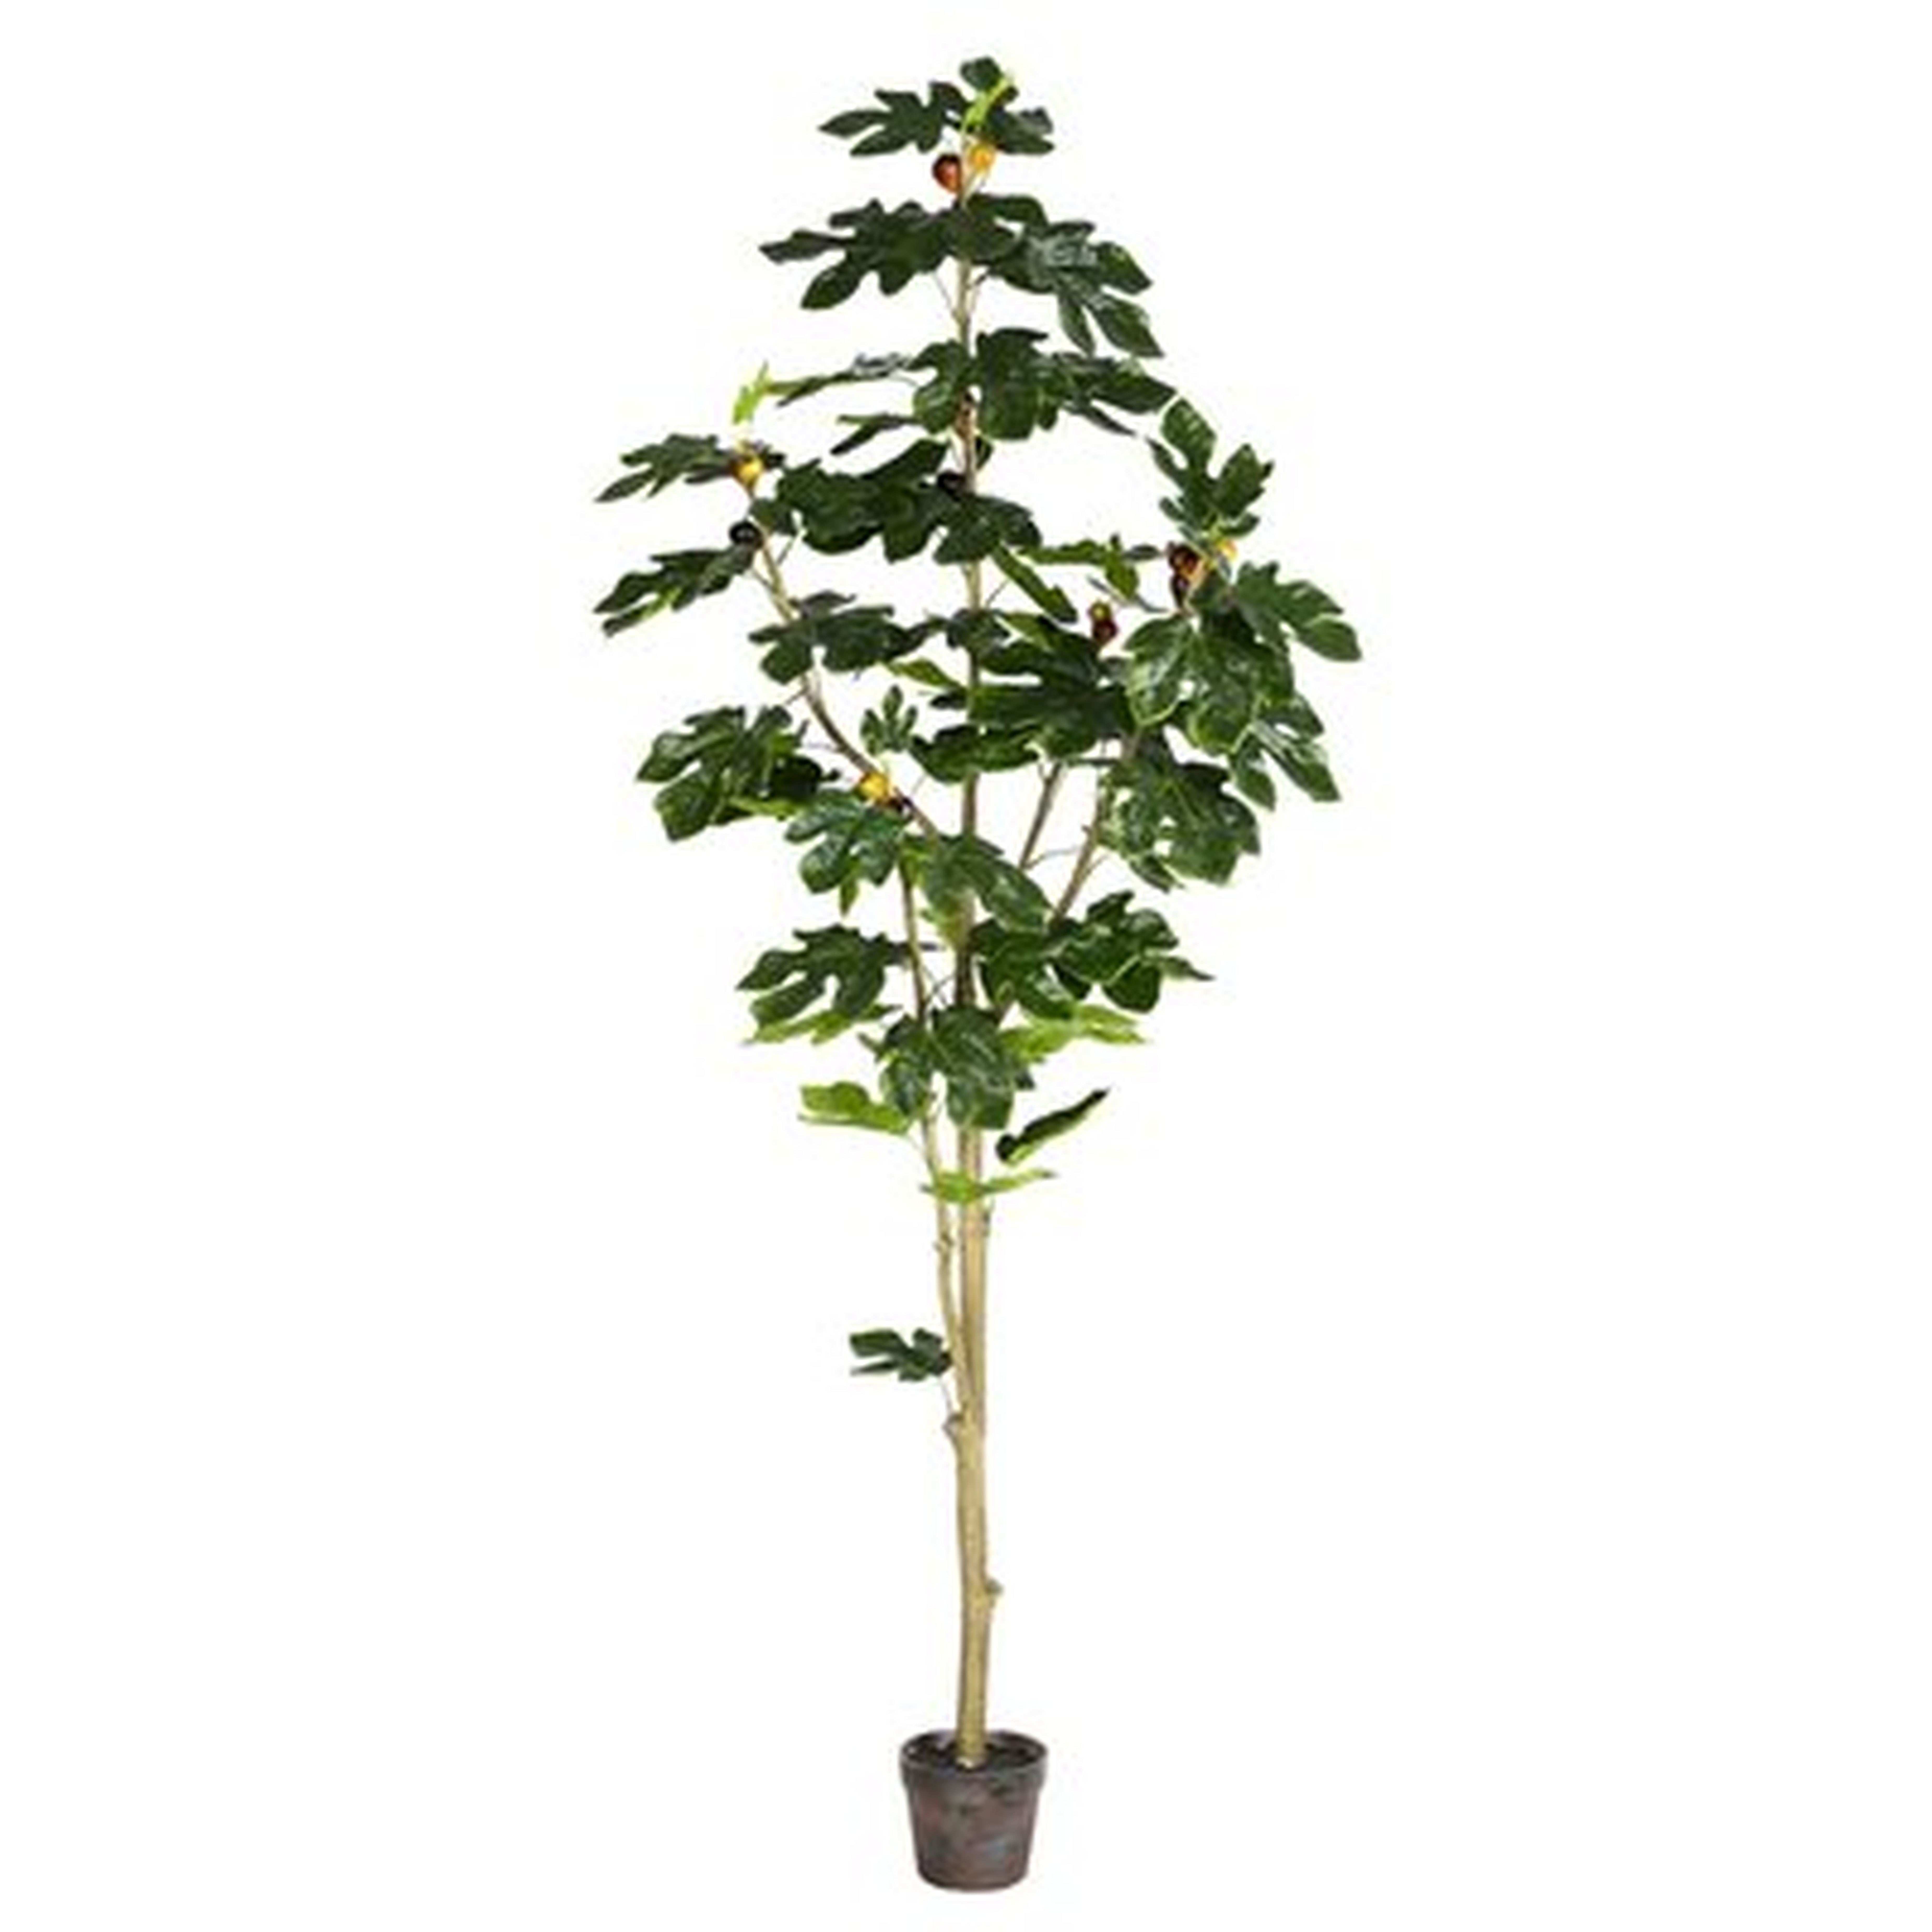 Artificial Potted Fig Floor Foliage Tree in Pot - Wayfair